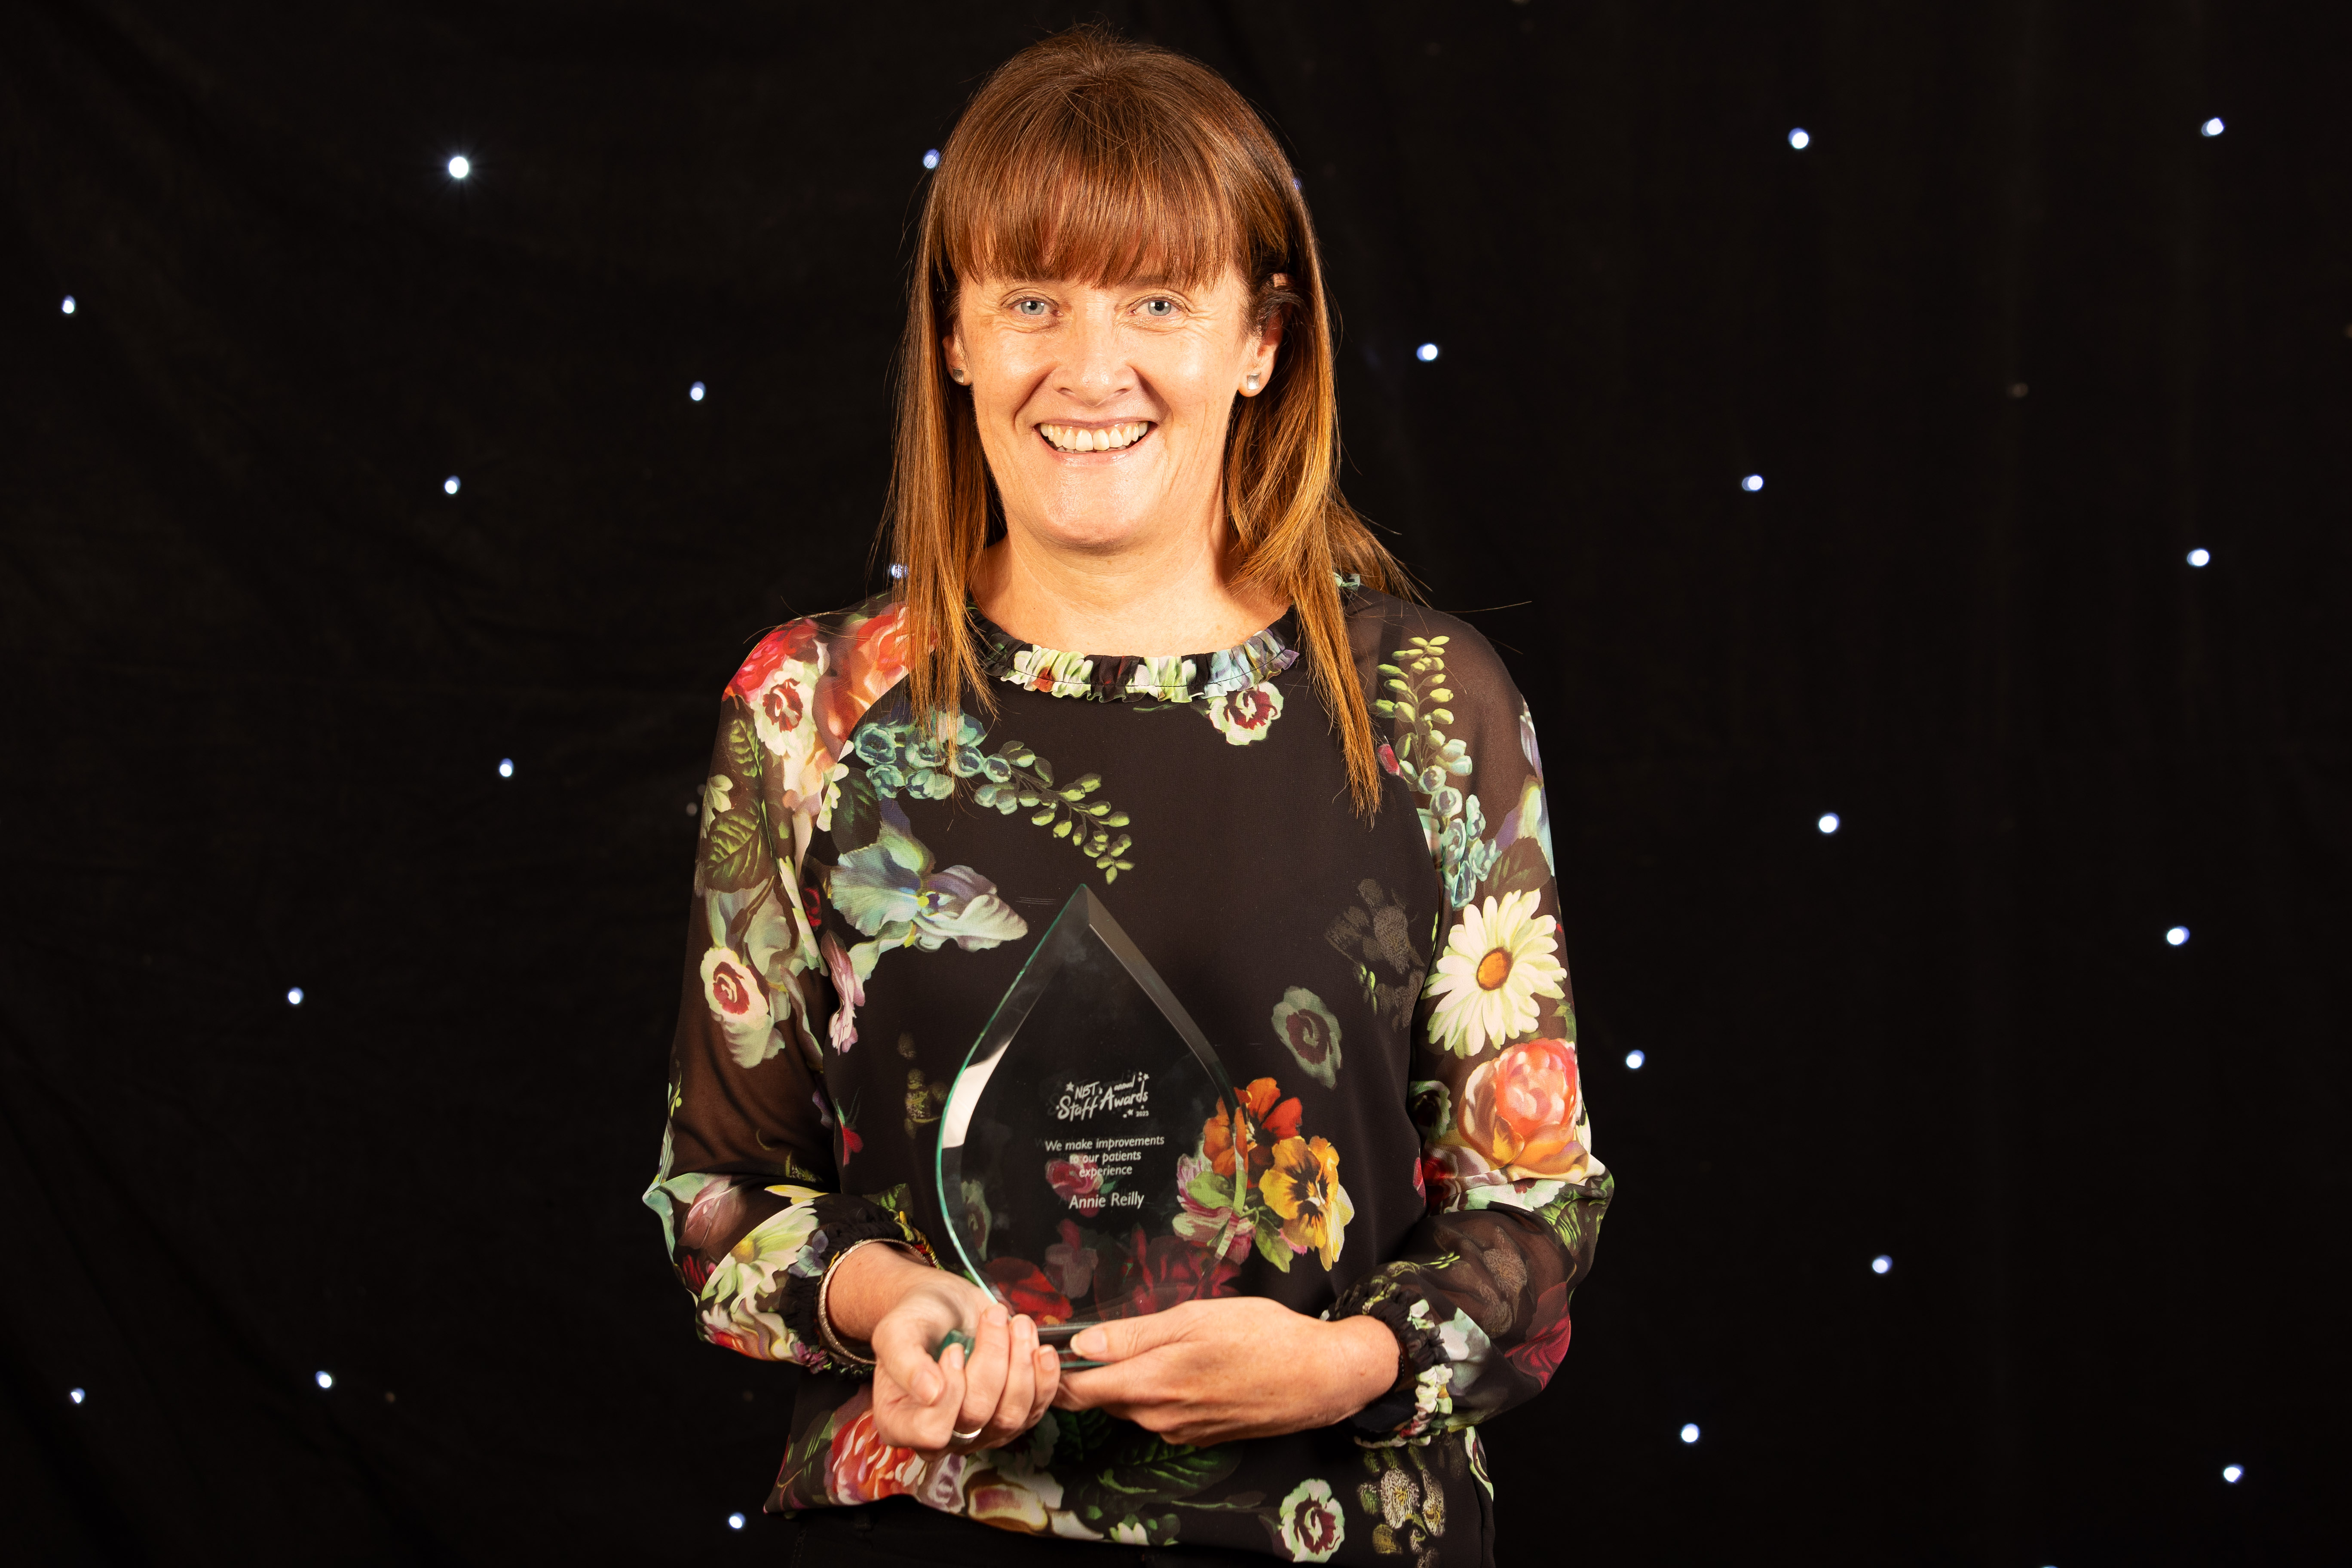 Annie Reilly, winner of the We make improvements to our patients' experience award